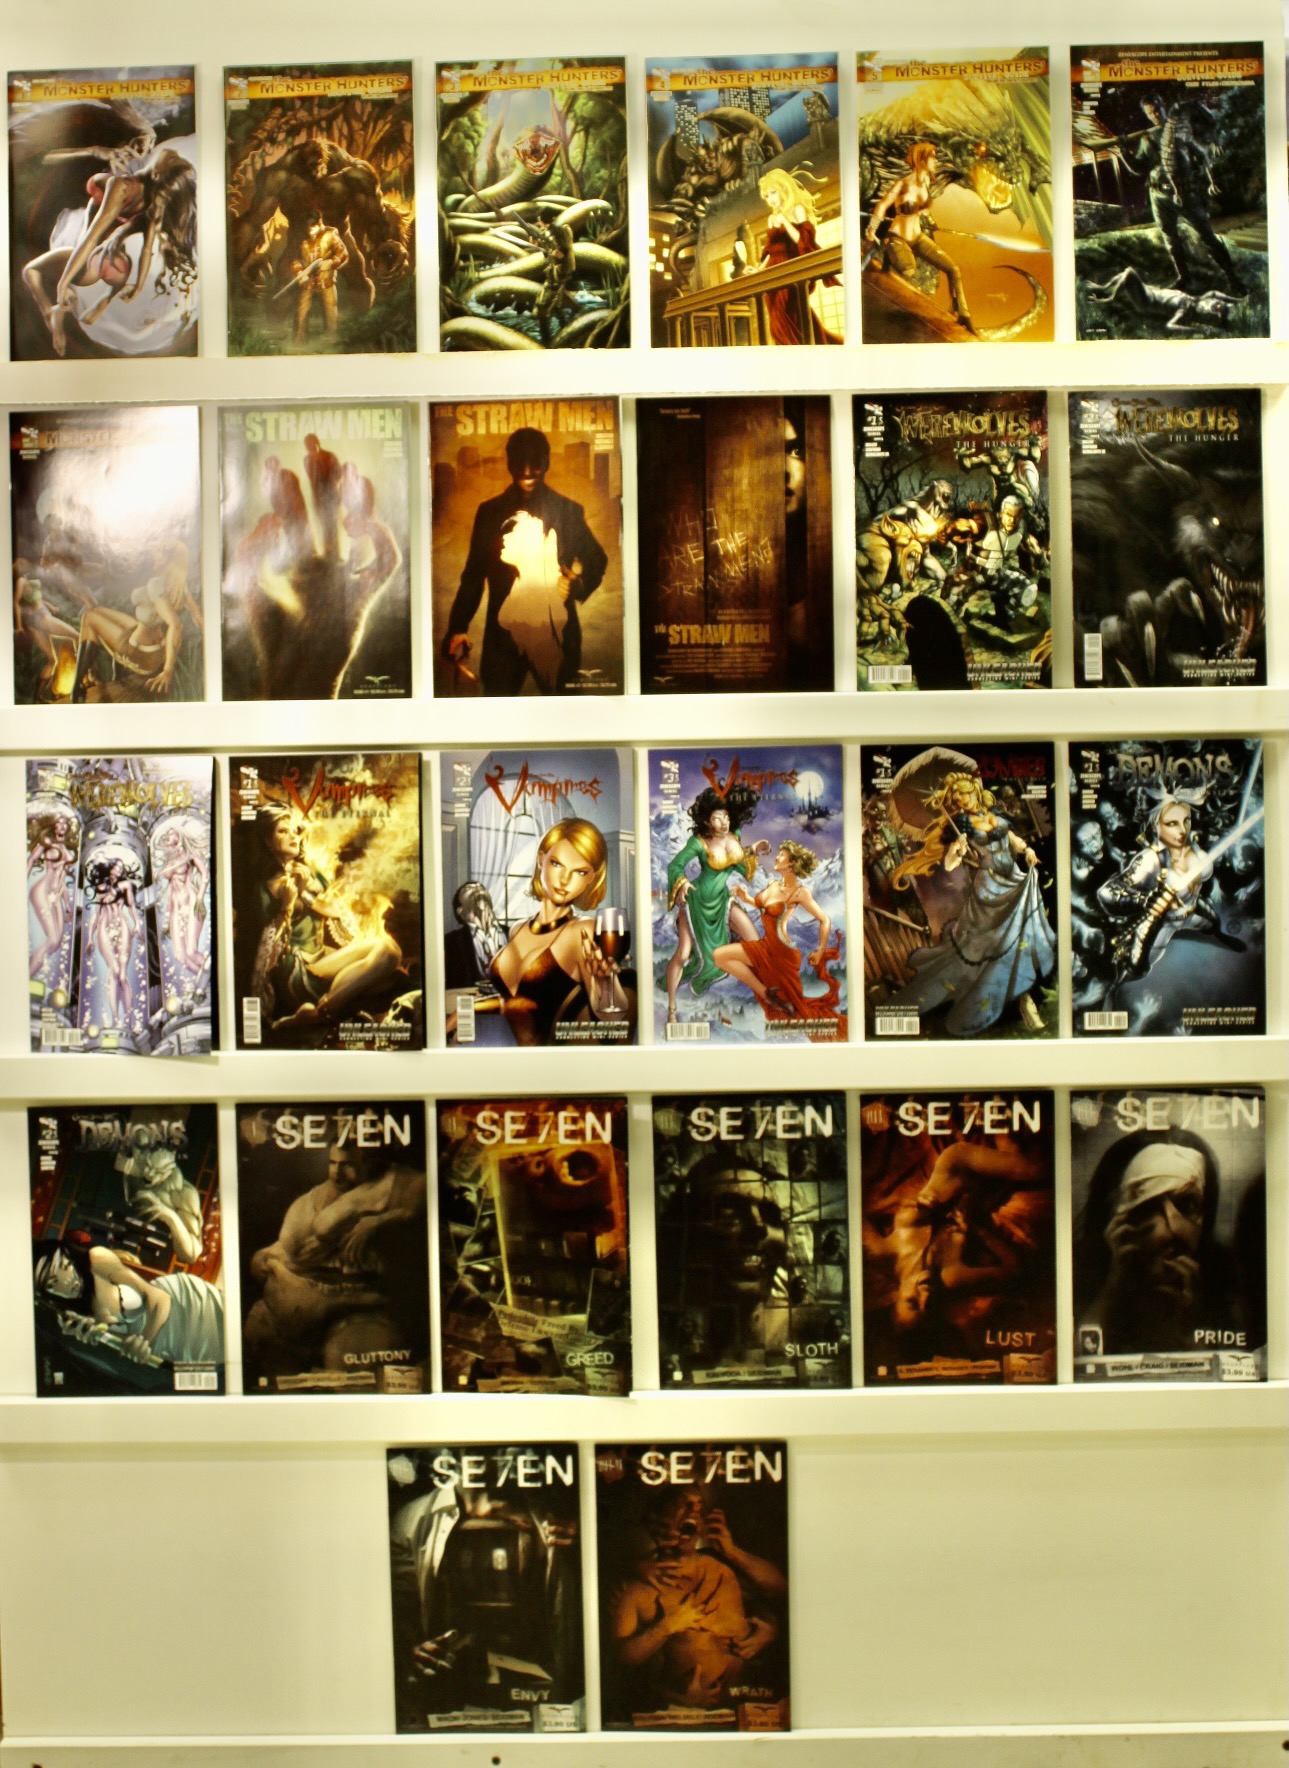 Monsters Hunters, Straw Men, Werewolves The Hunger, Vampires The Eternal, Zombies The Cursed, Demons The Unseen, Se7en, One Shot Case Files Chupcabra &amp; Sasquatch   Lot Of 26 Comics - Primary